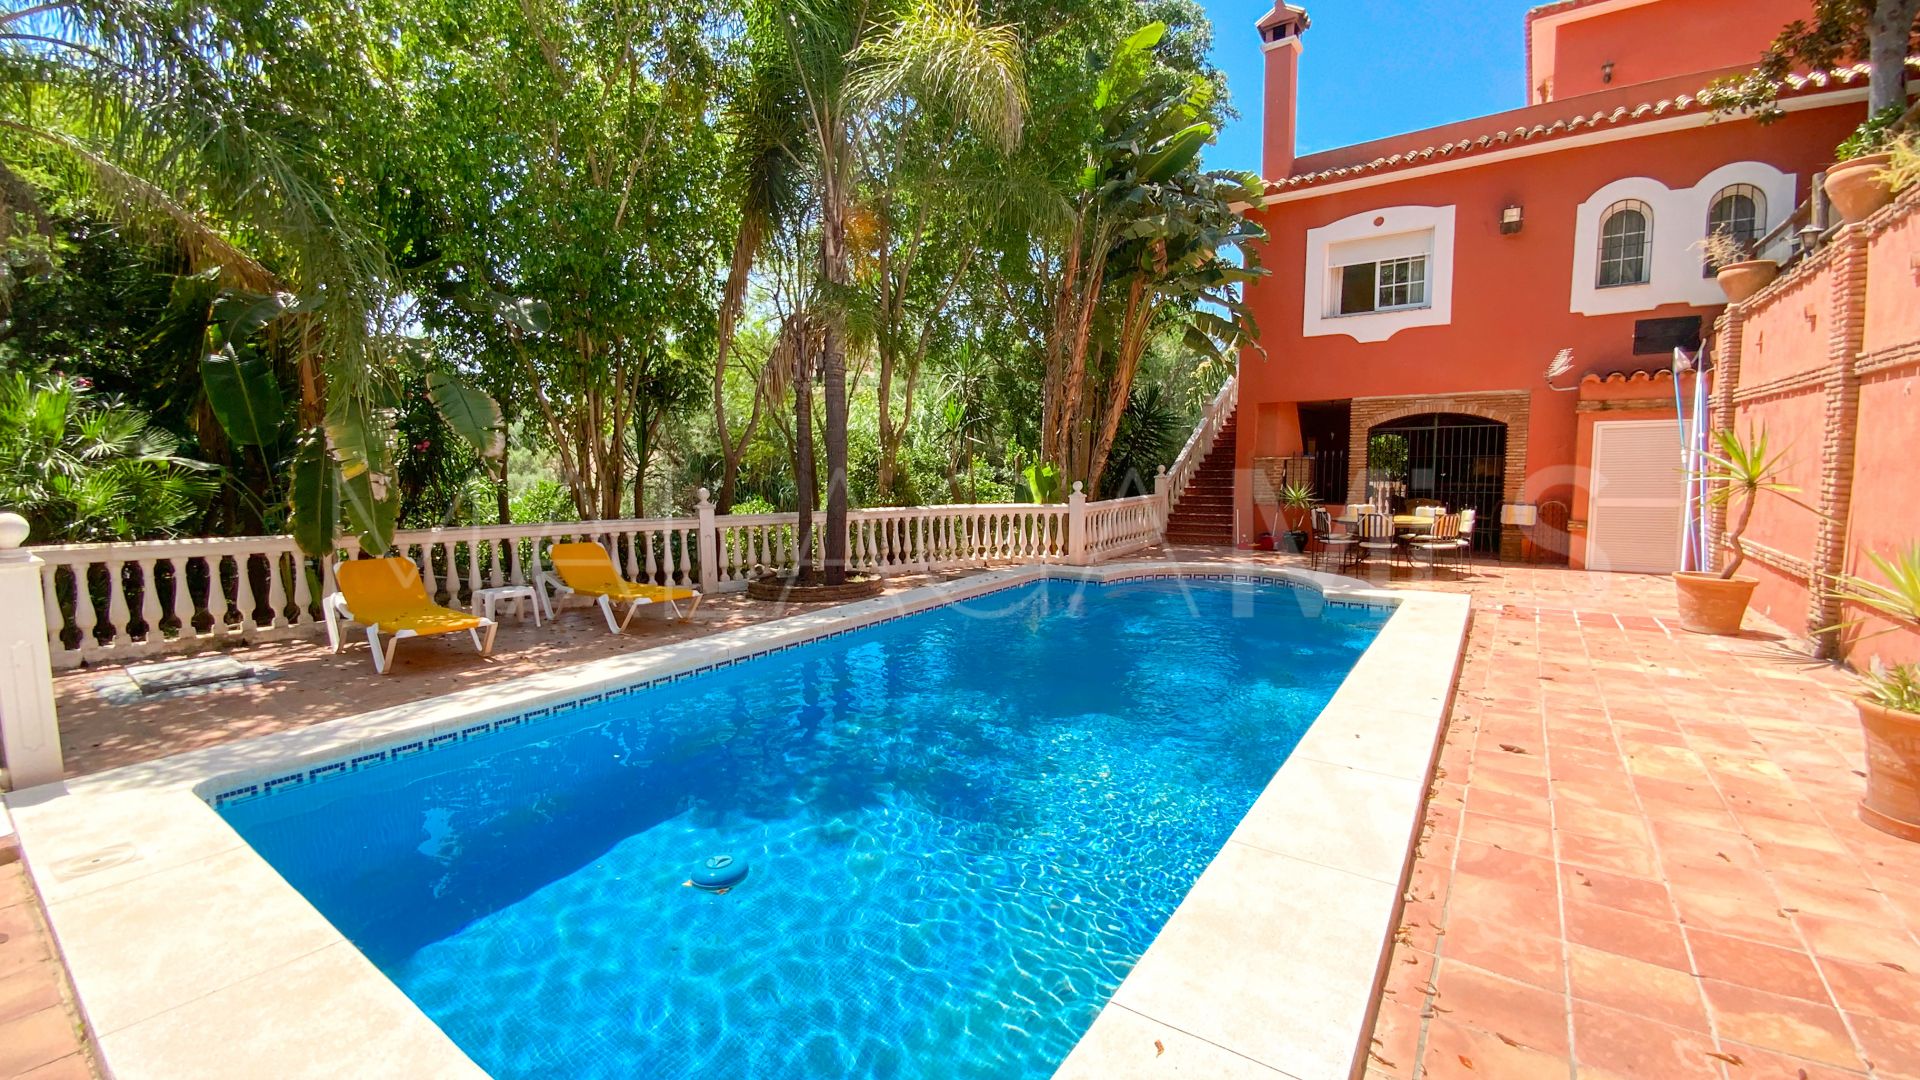 Mijas Golf, casa with 6 bedrooms for sale